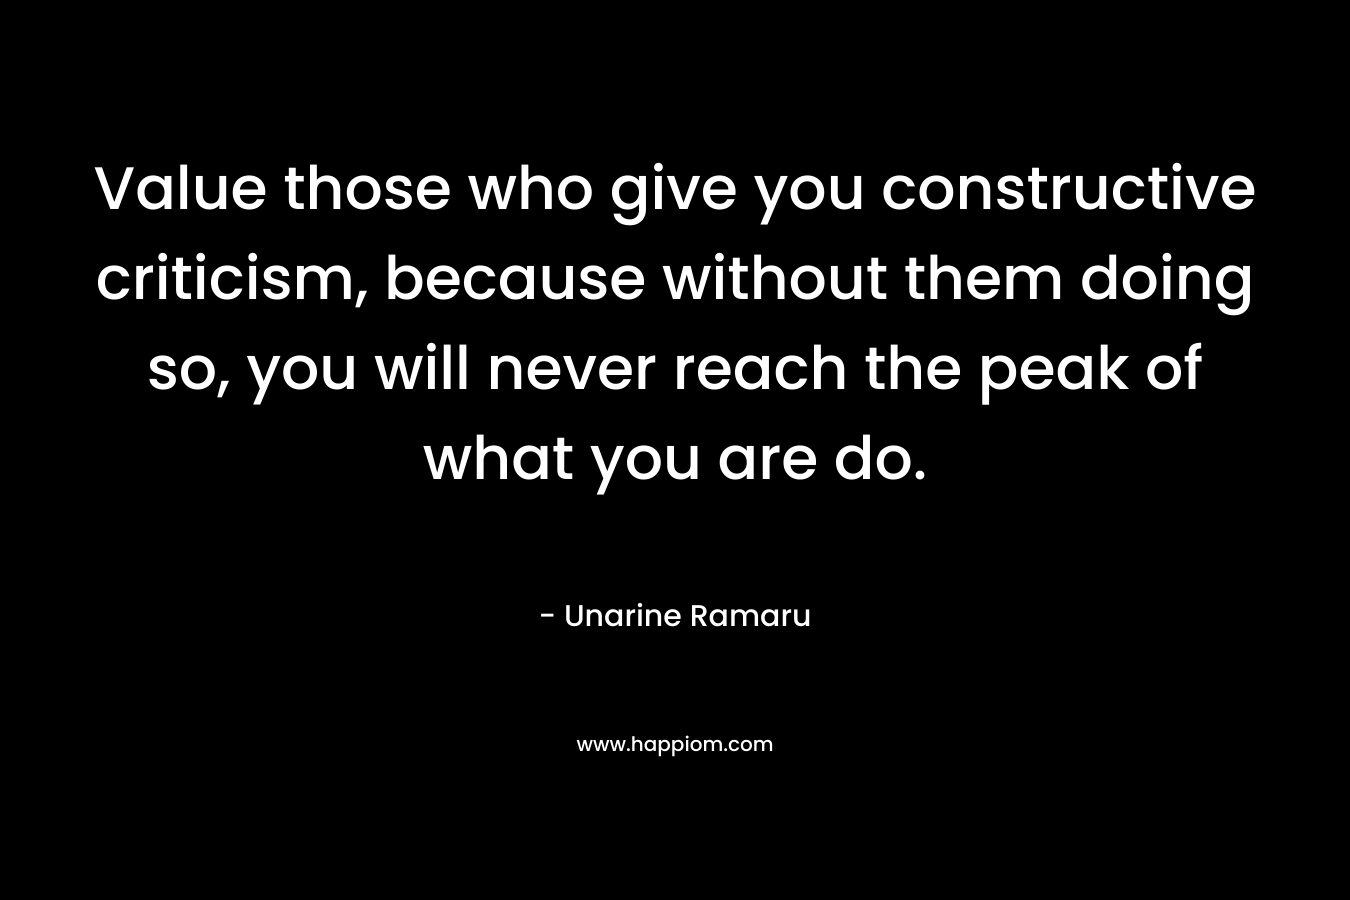 Value those who give you constructive criticism, because without them doing so, you will never reach the peak of what you are do. – Unarine Ramaru